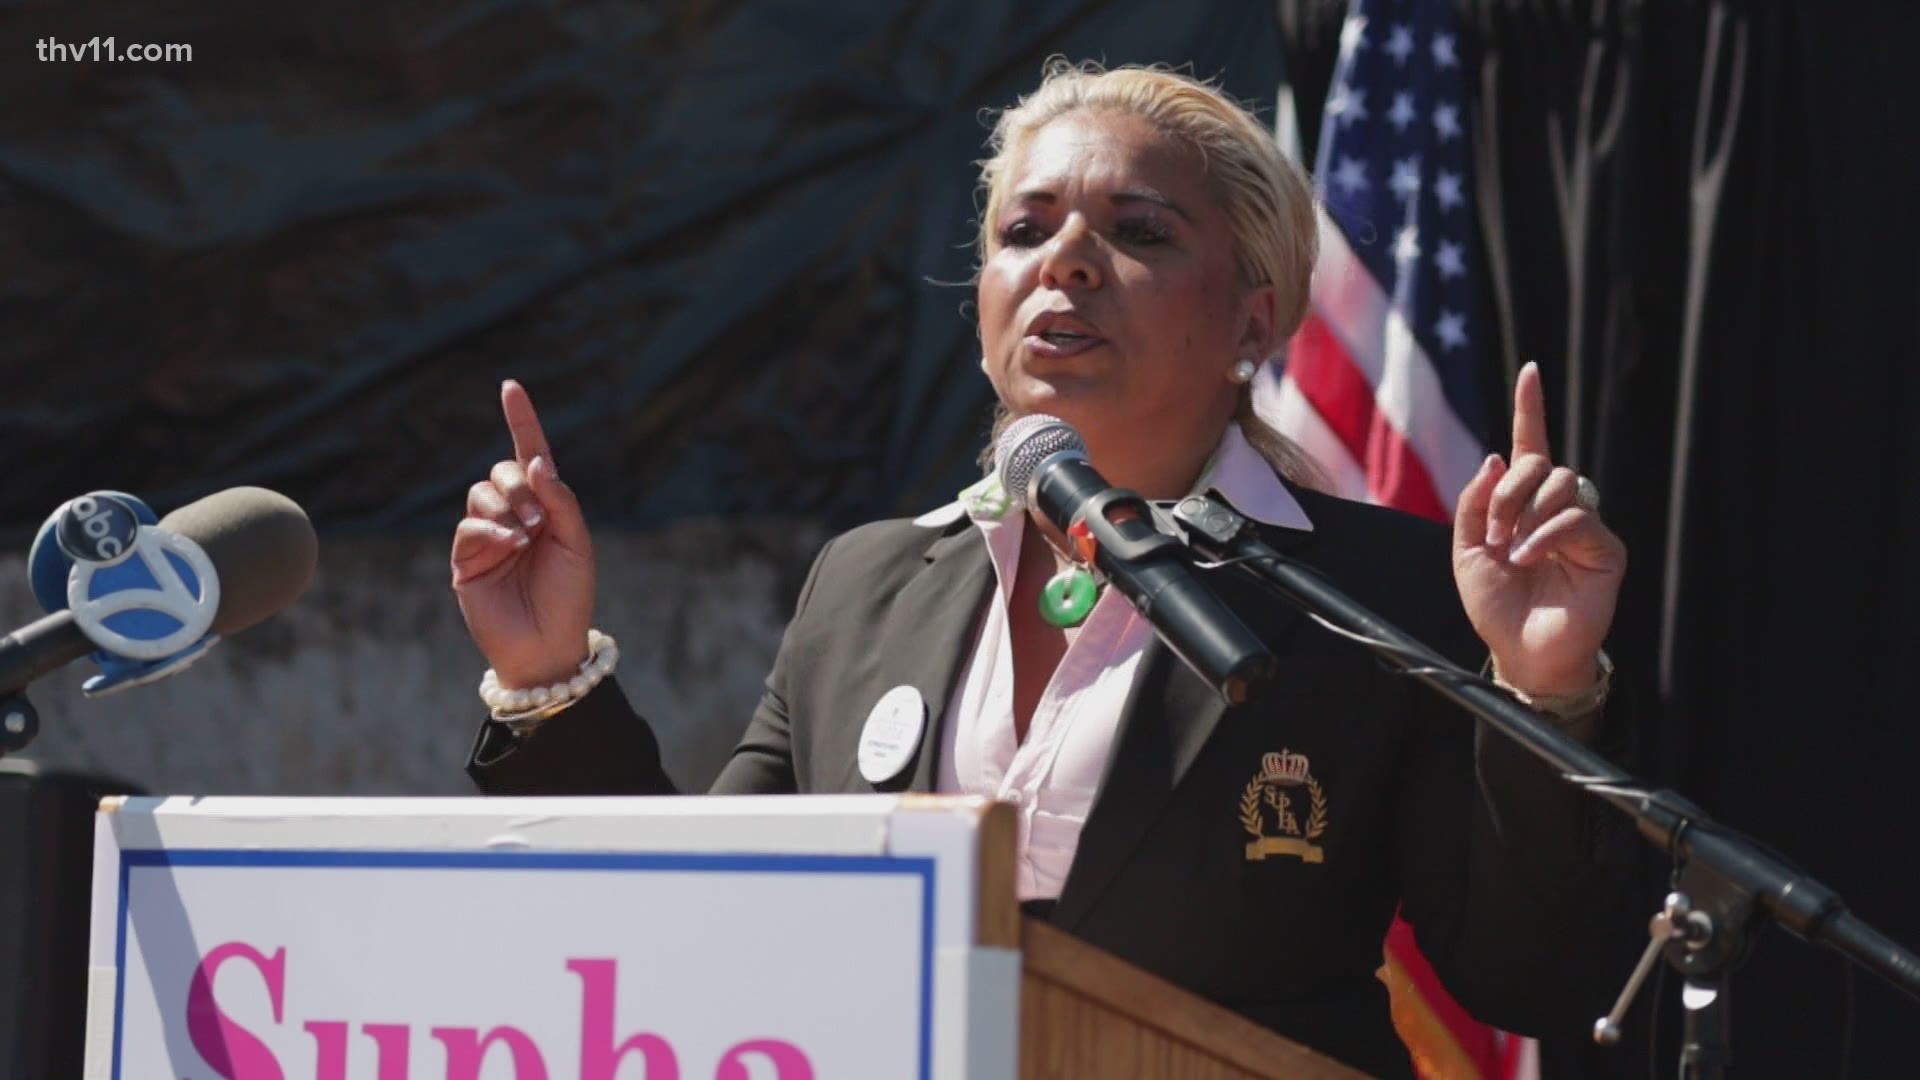 Supha Xayprasith-Mays is the first Democratic candidate to announce their run for Arkansas governor in 2022.